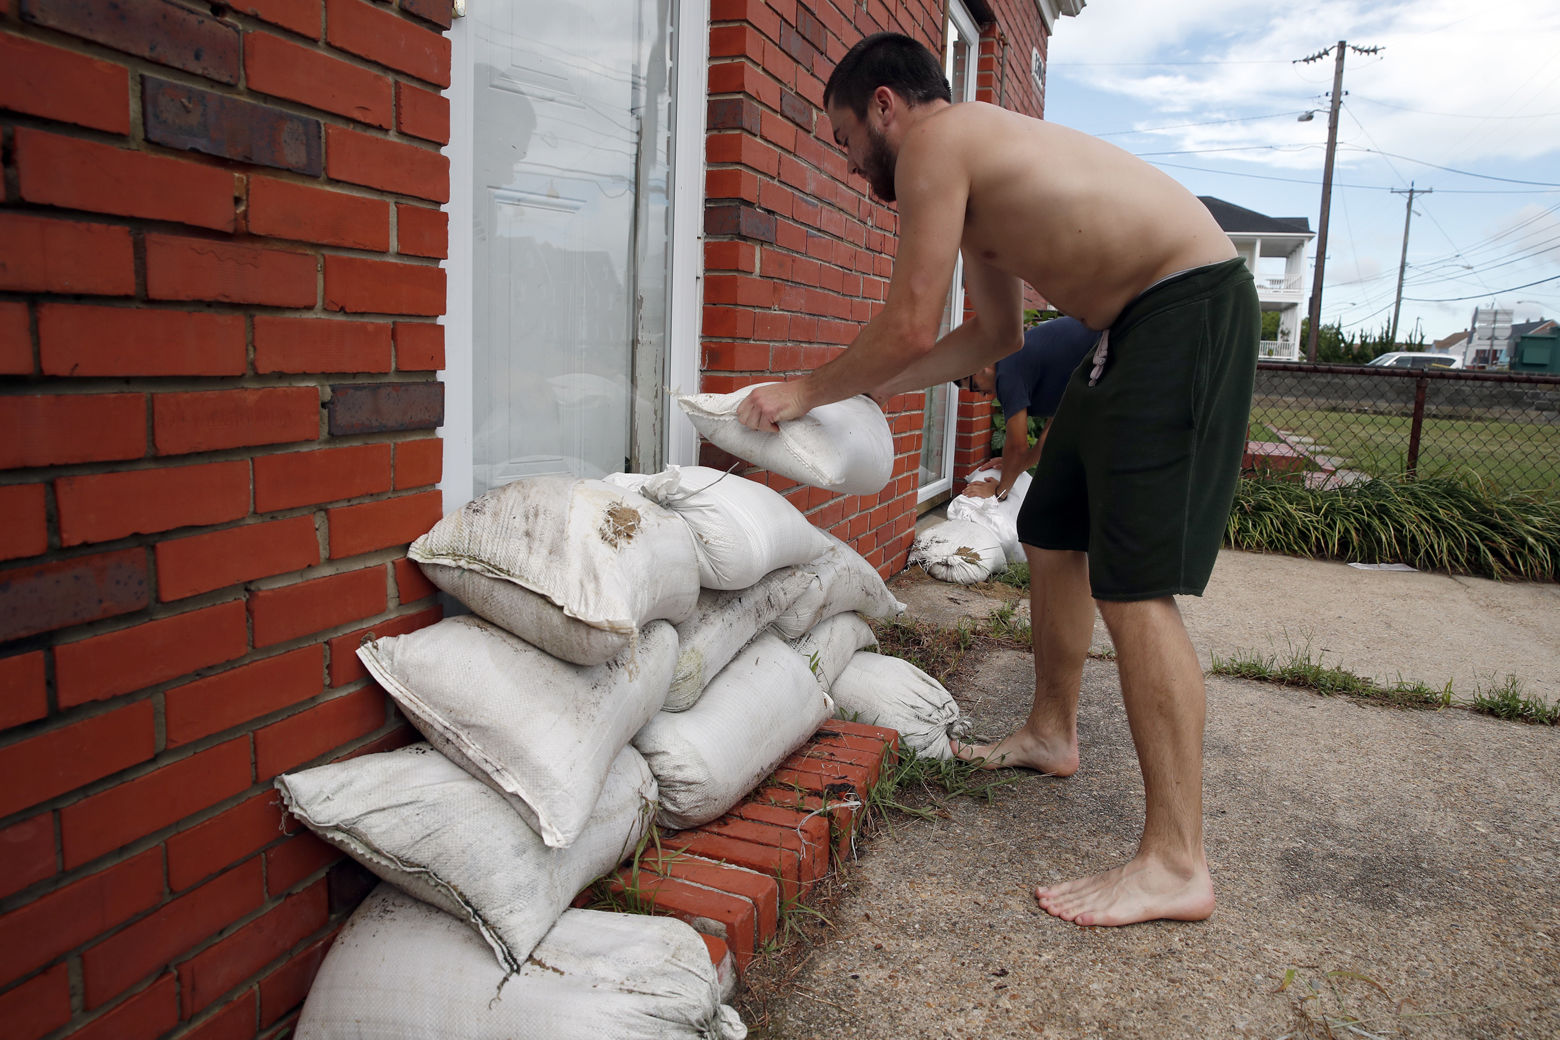 Adam Bazemore places sandbags in the doorways, Tuesday, Sept. 11, 2018, in the Willoughby Spit area of Norfolk, Va., as he makes preparations for Hurricane Florence. (AP Photo/Alex Brandon)